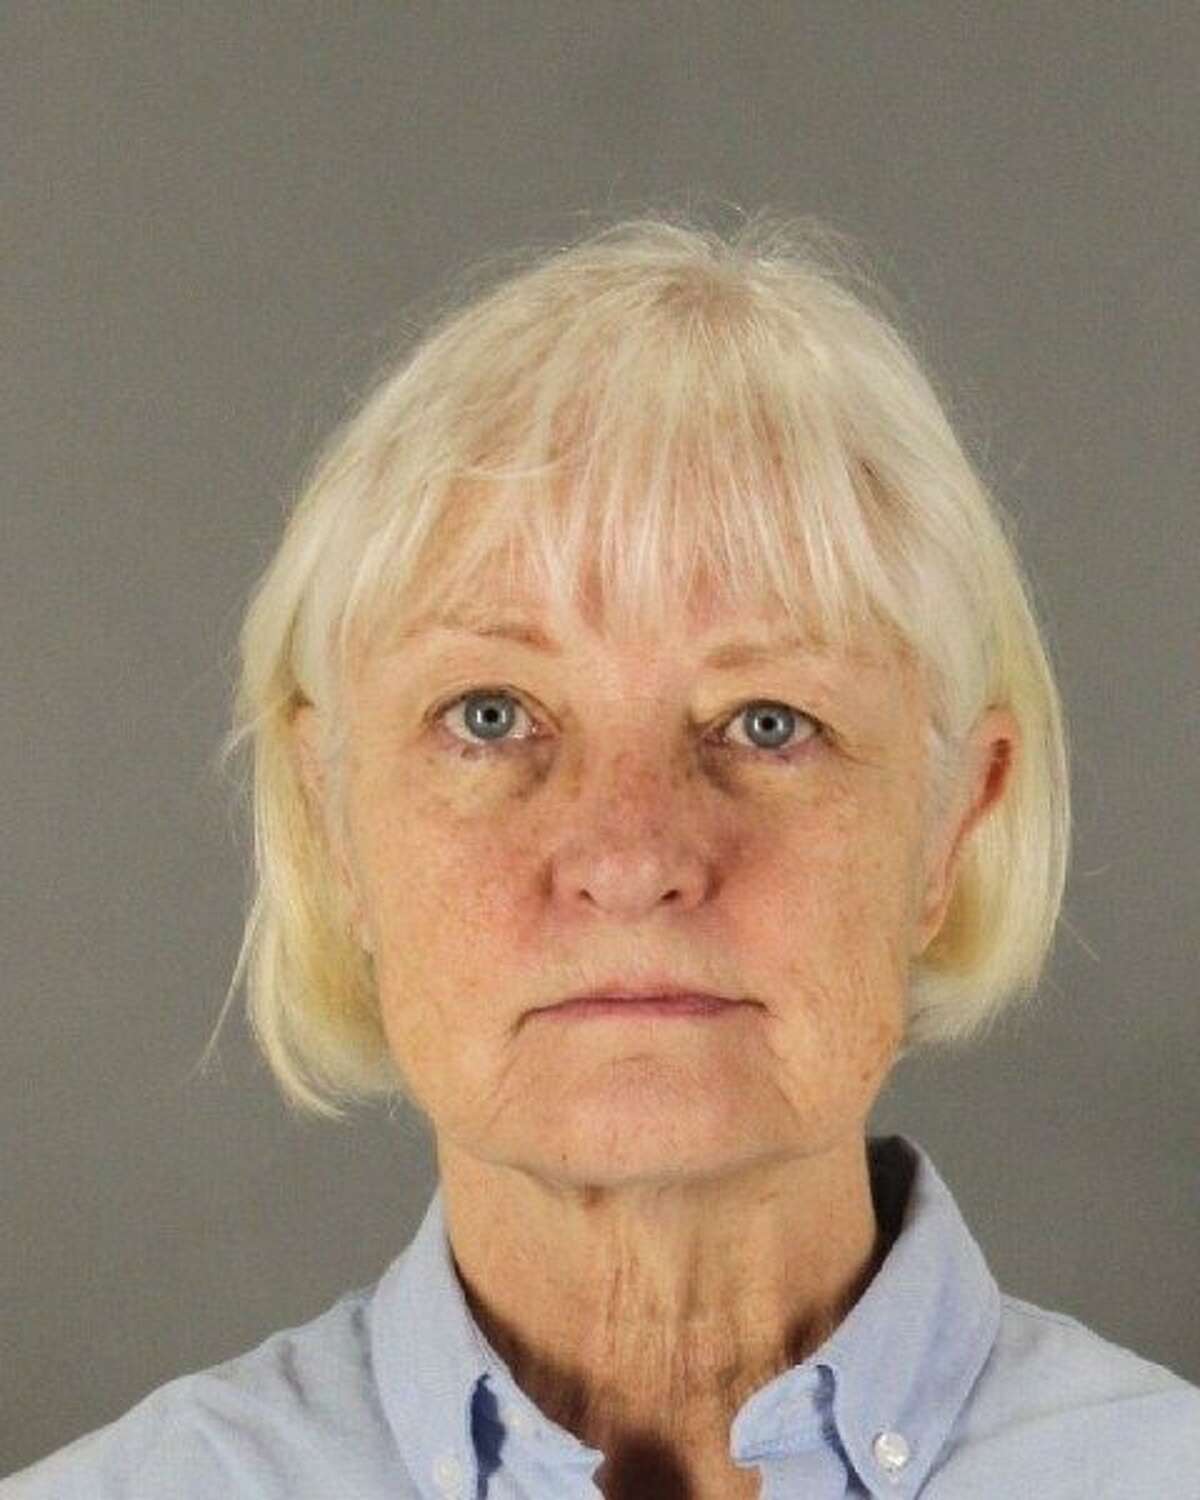 Marilyn Hartman, 62, allegedly sneaked aboard a Southwest Airlines flight from San Jose to Los Angeles on Monday, Aug. 4, 2014, before being arrested upon arrival. Authorities say she has a history of trying to sneak onto flights at San Francisco International Airport.